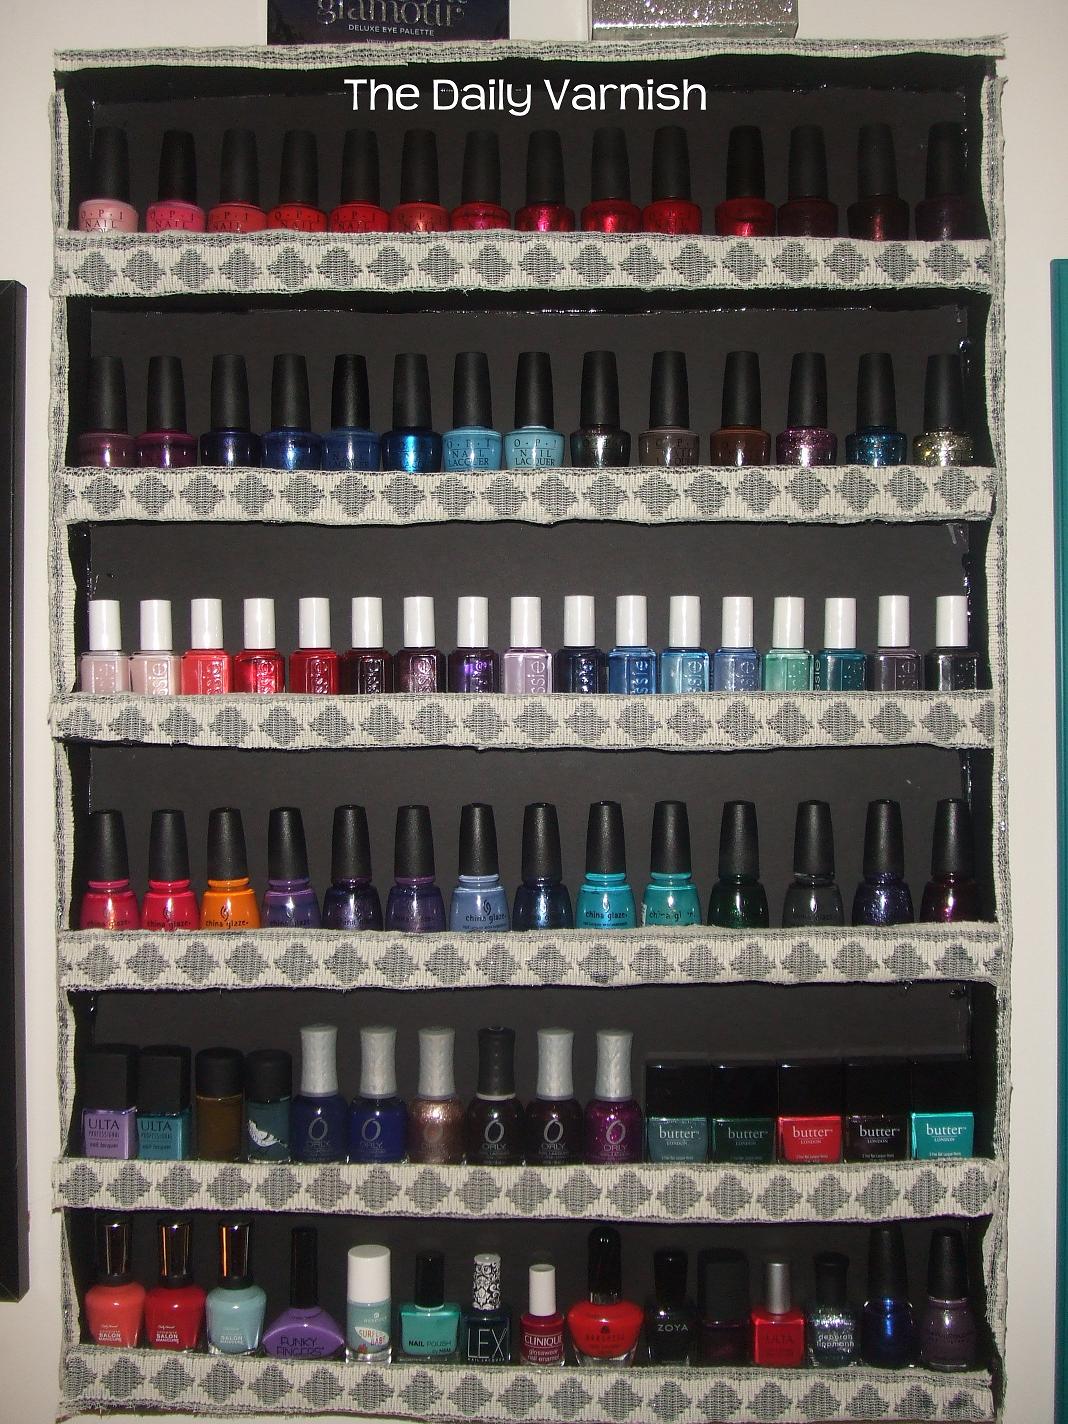 I mentioned in my post about my DIY nail polish rack that I wanted to